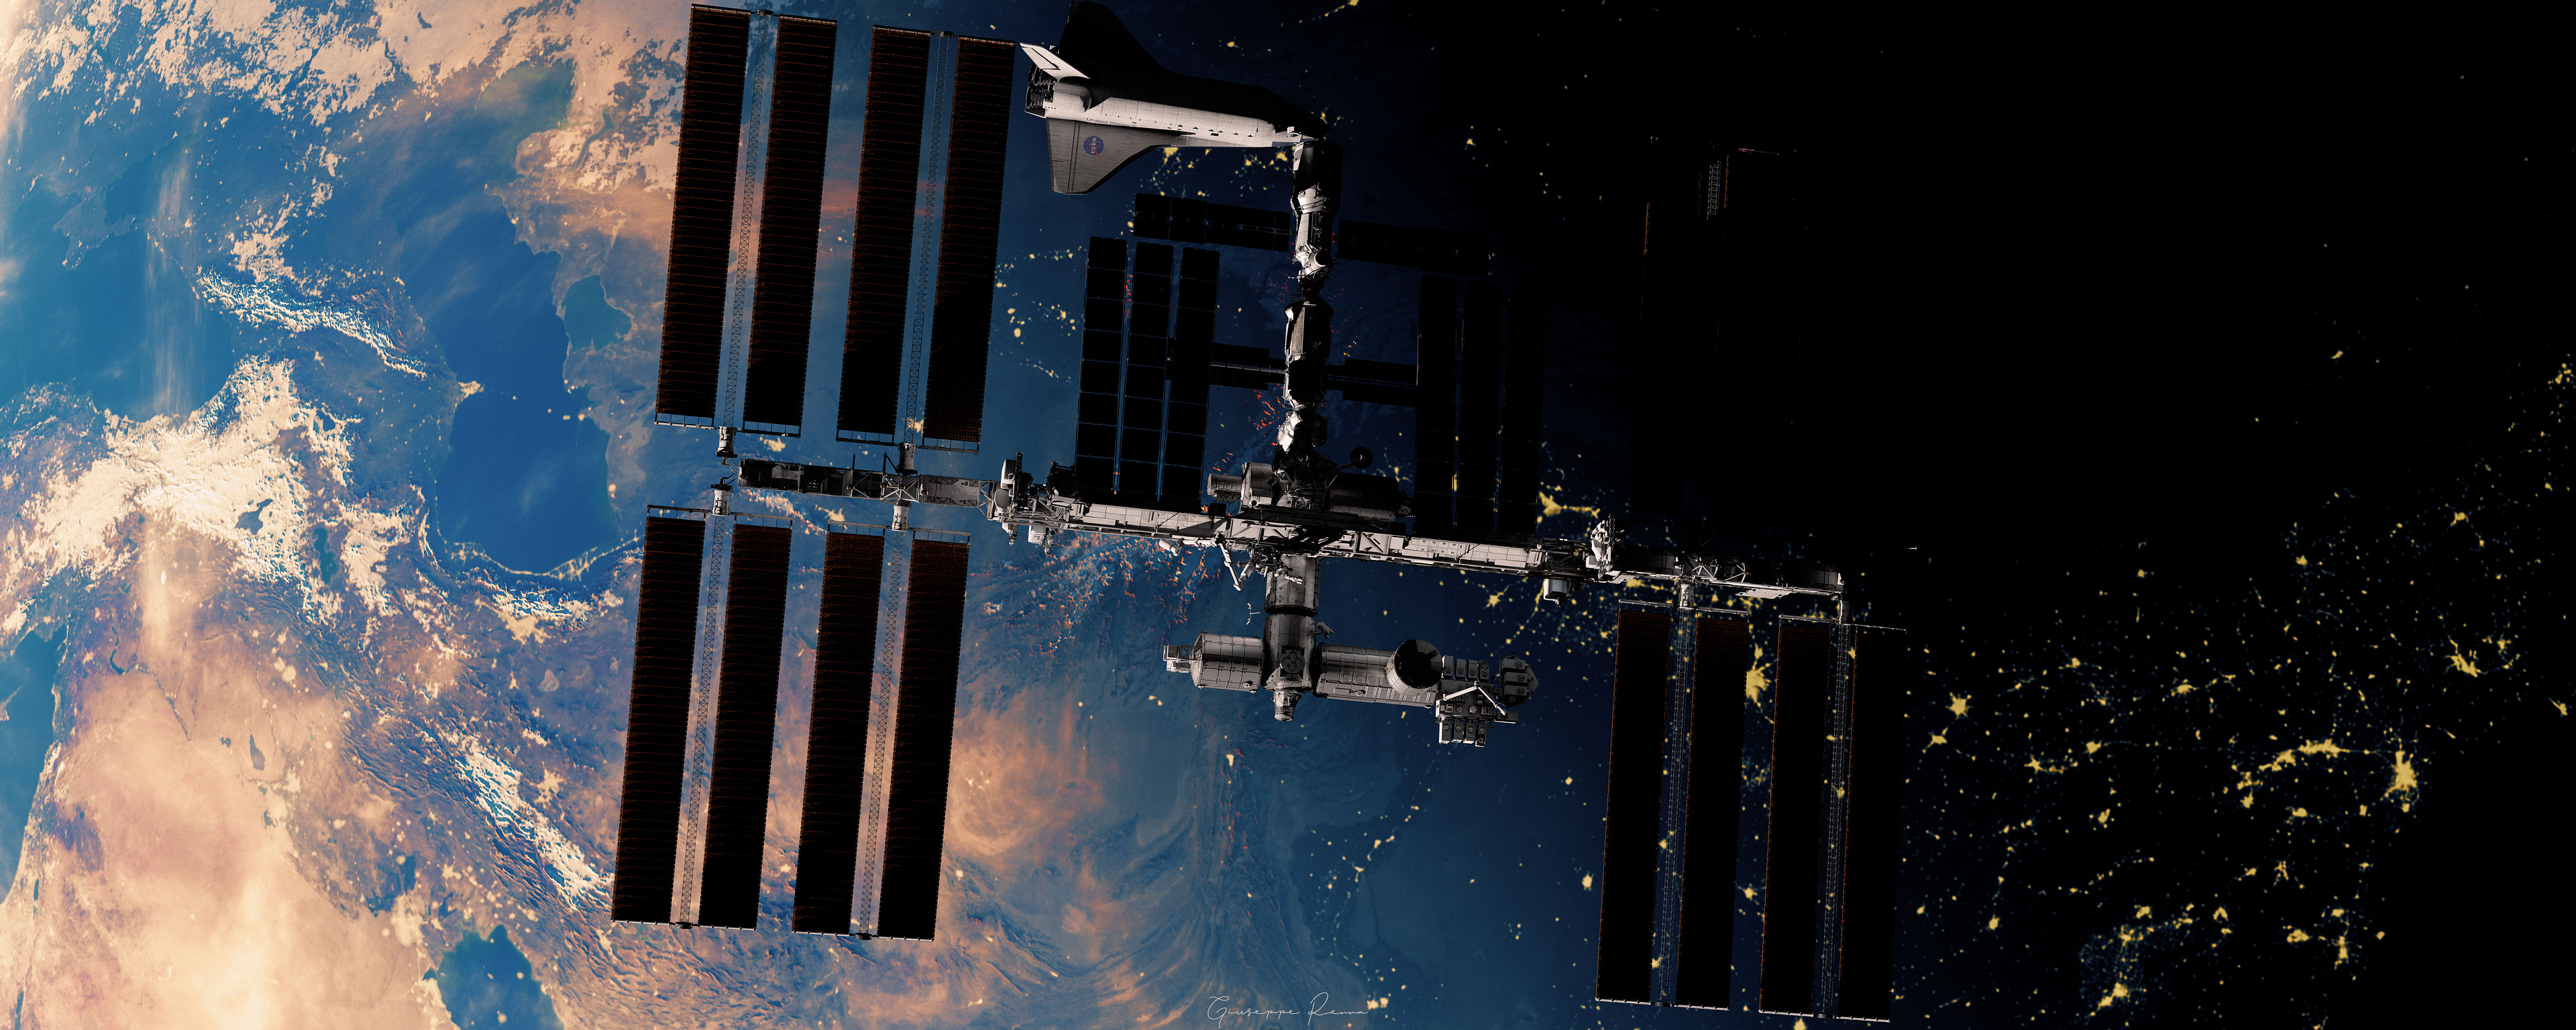 international space station, space station, man made, space shuttle